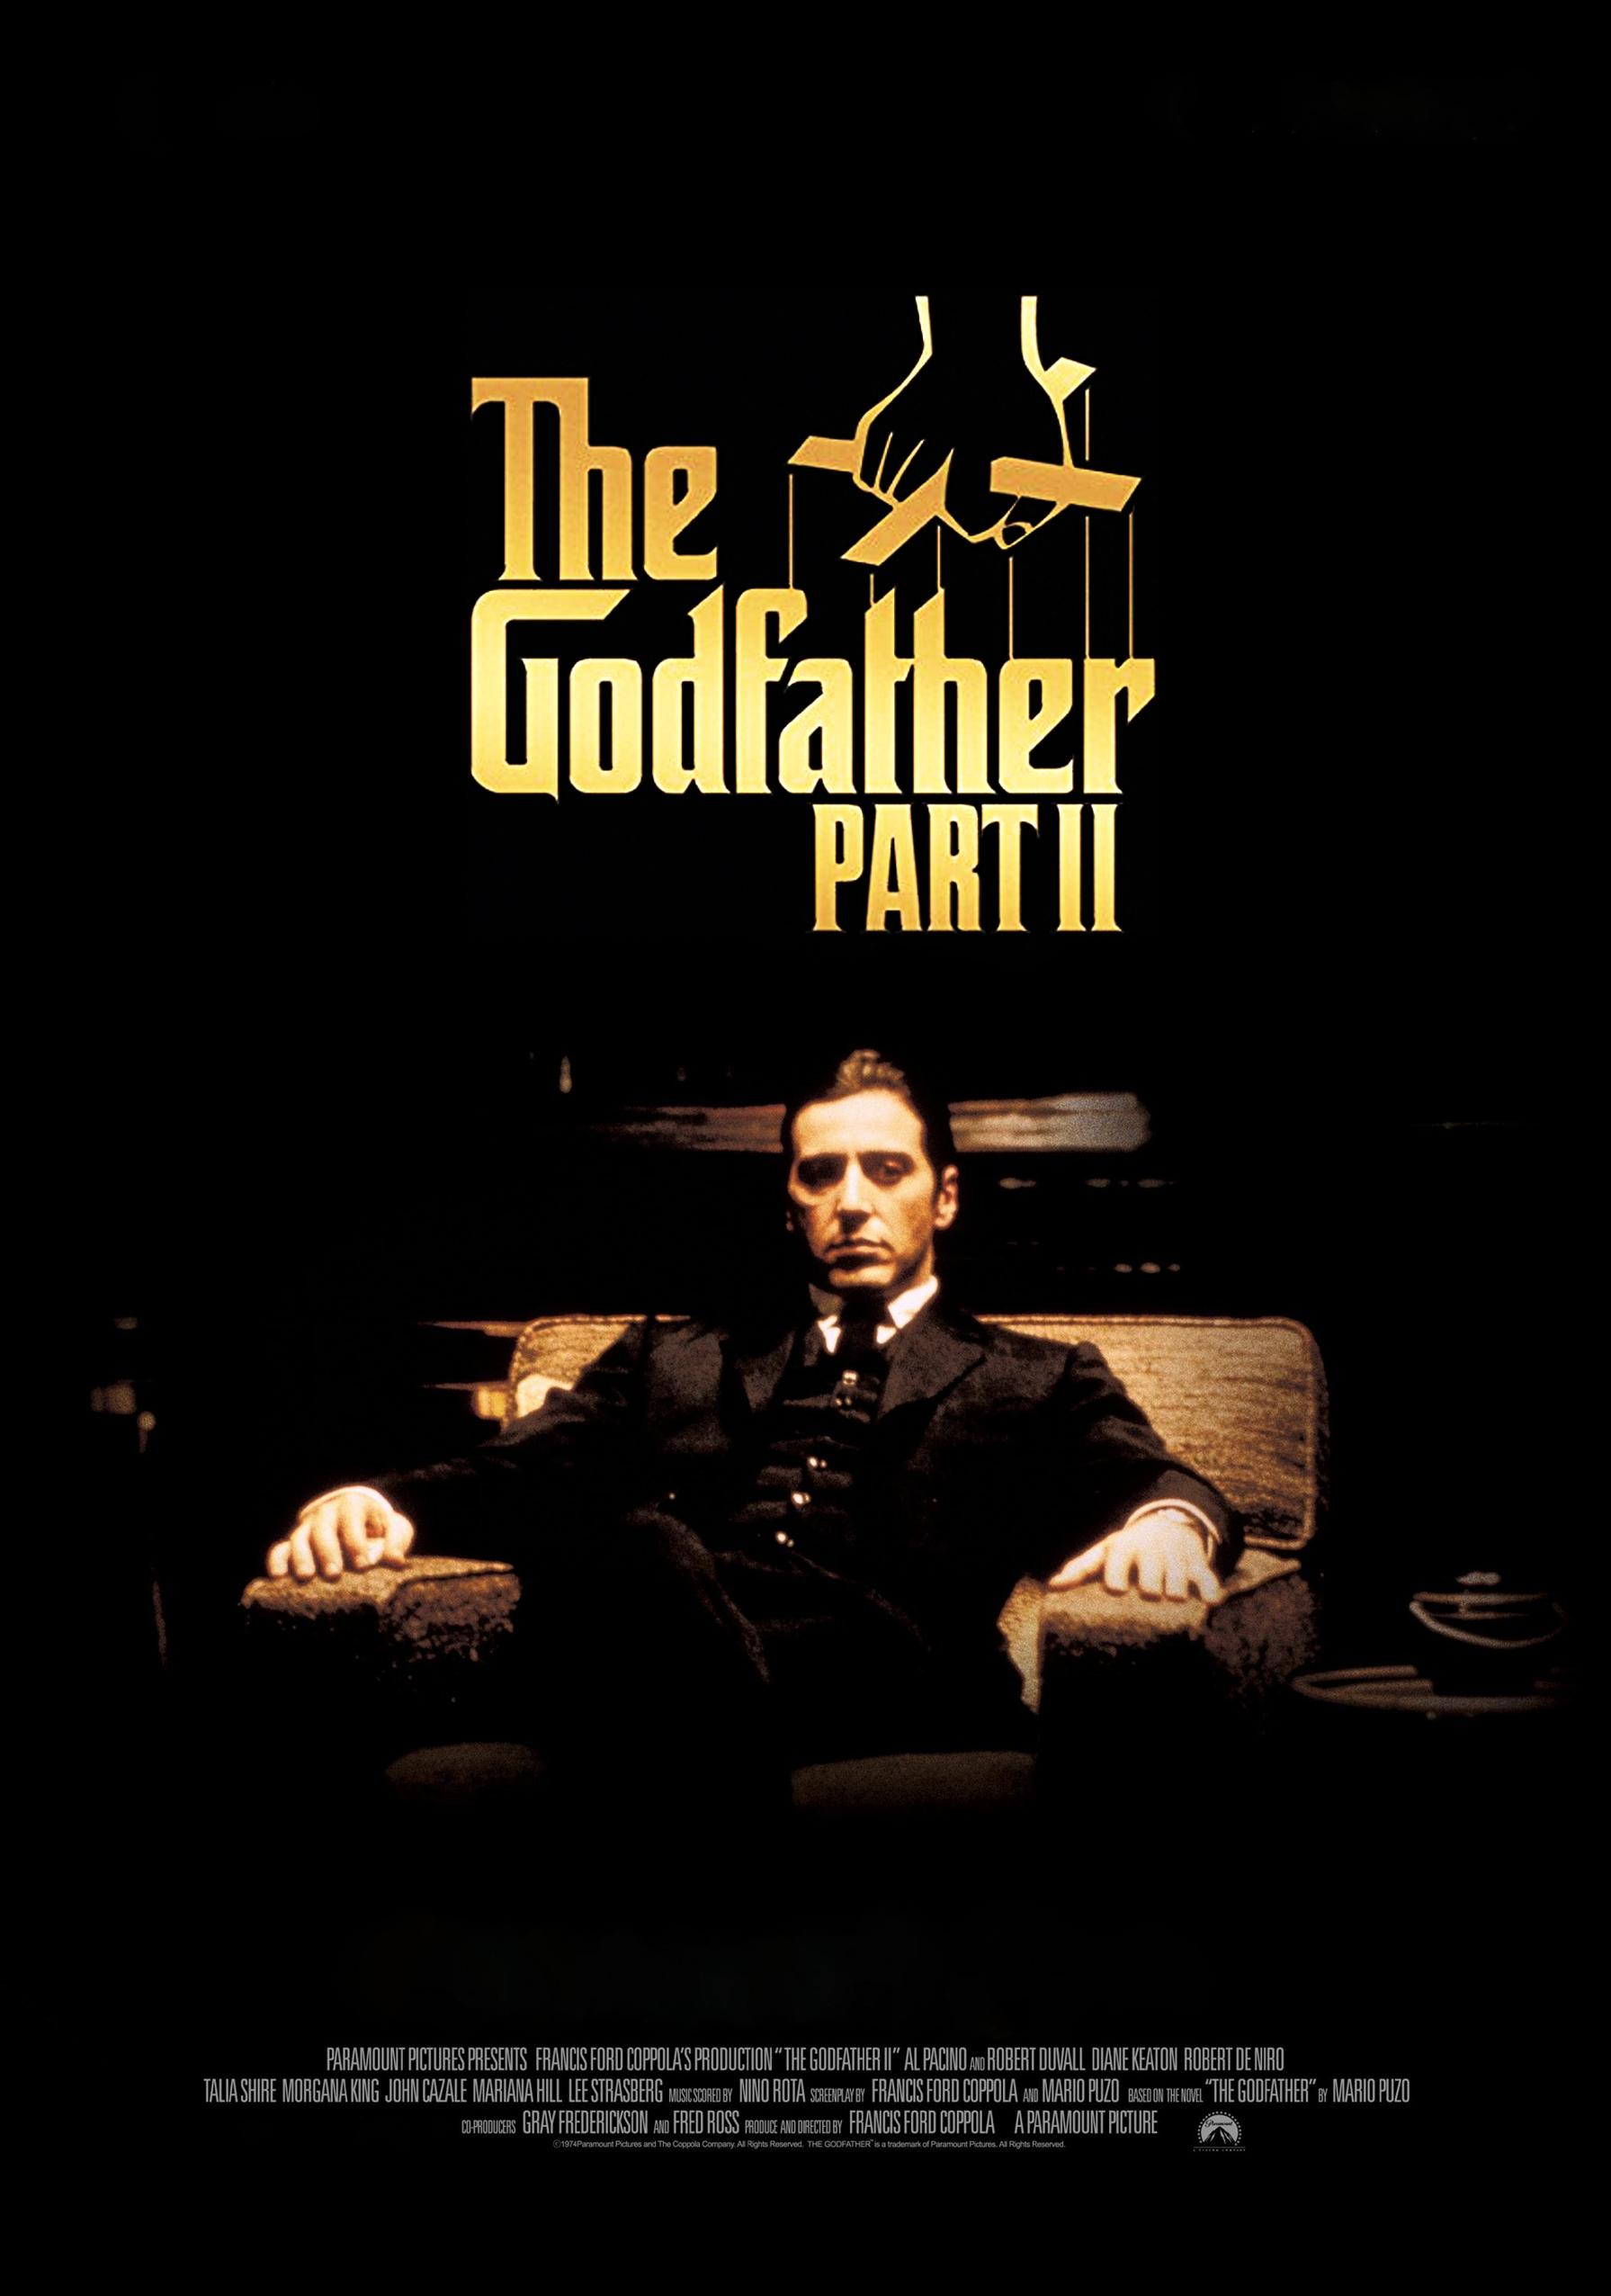 FULL MOVIE: The Godfather: Part 2 (1974)